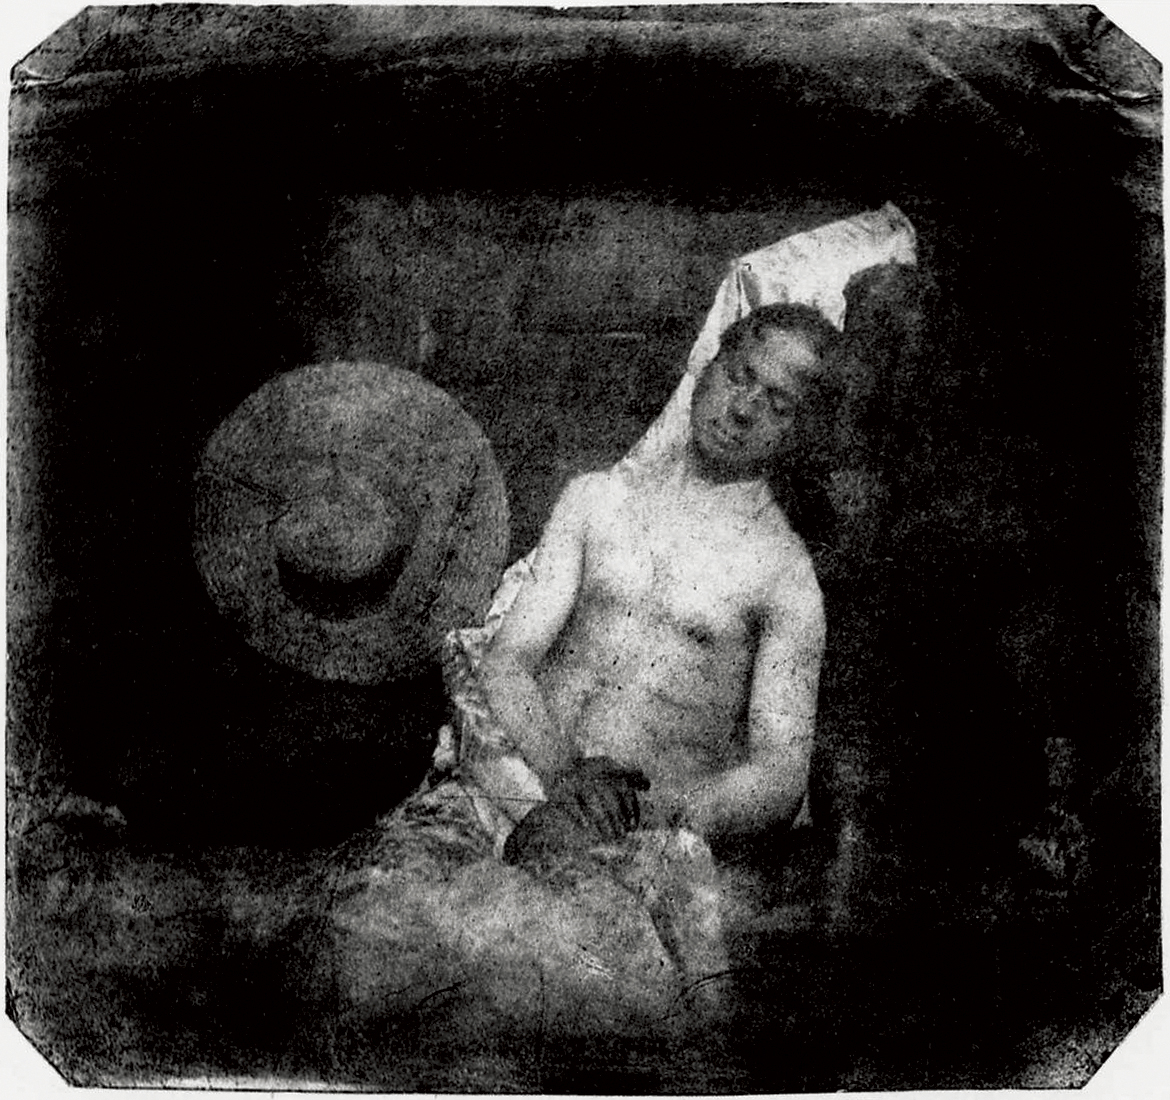 A drowned man by Bayard that happens to be a hoax photo